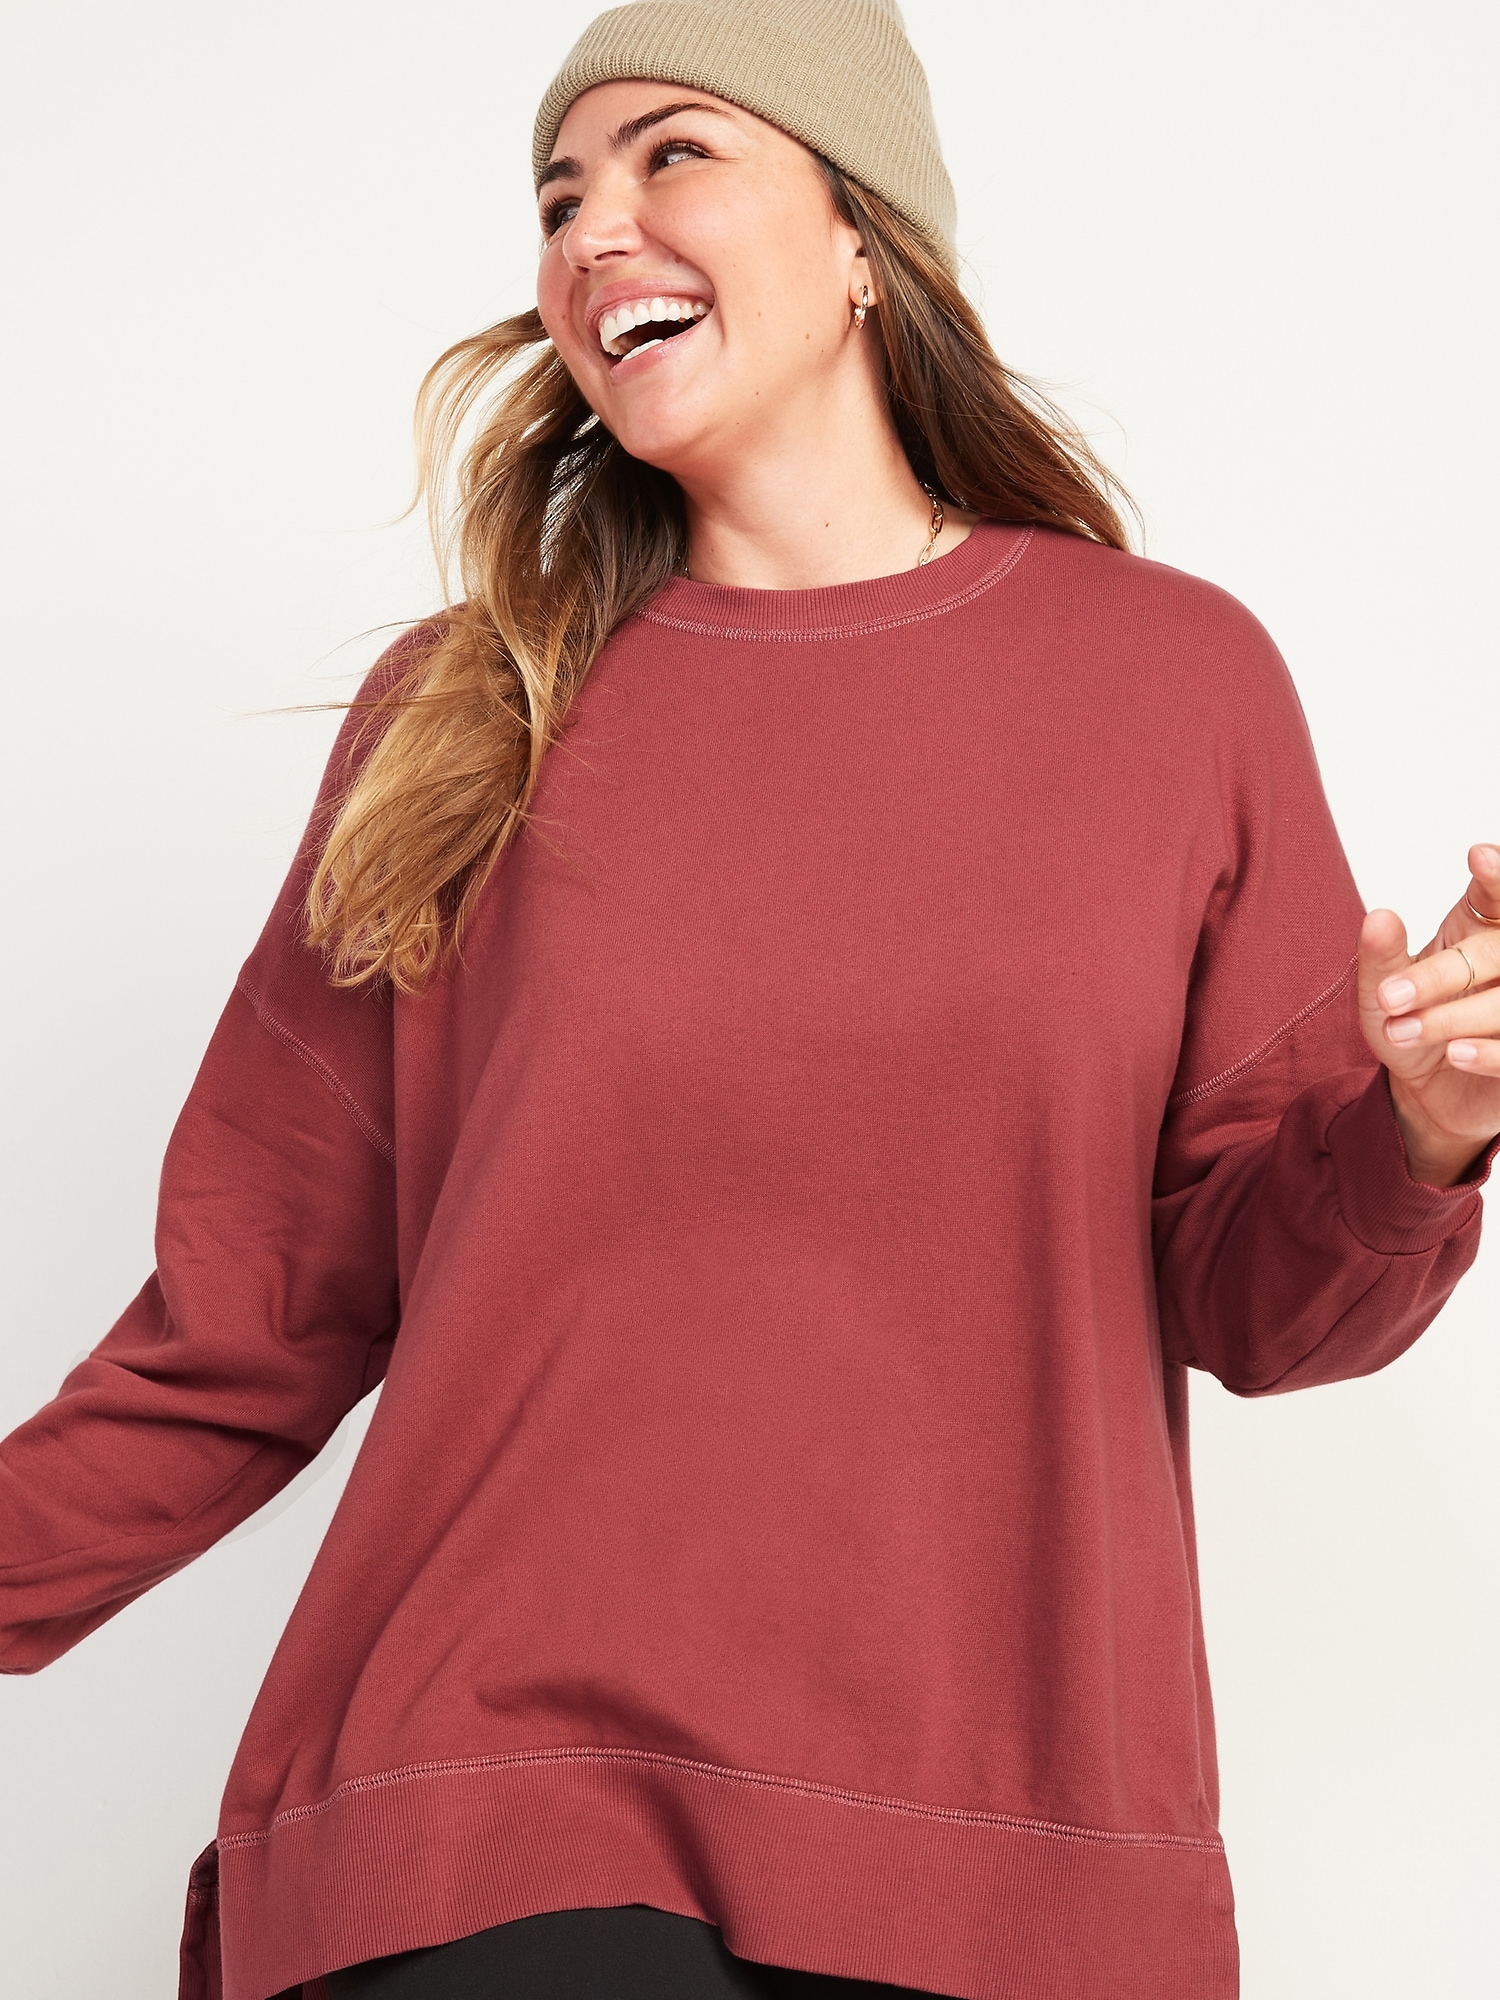 Oversized French Terry Tunic Sweatshirt for Women, Old Navy